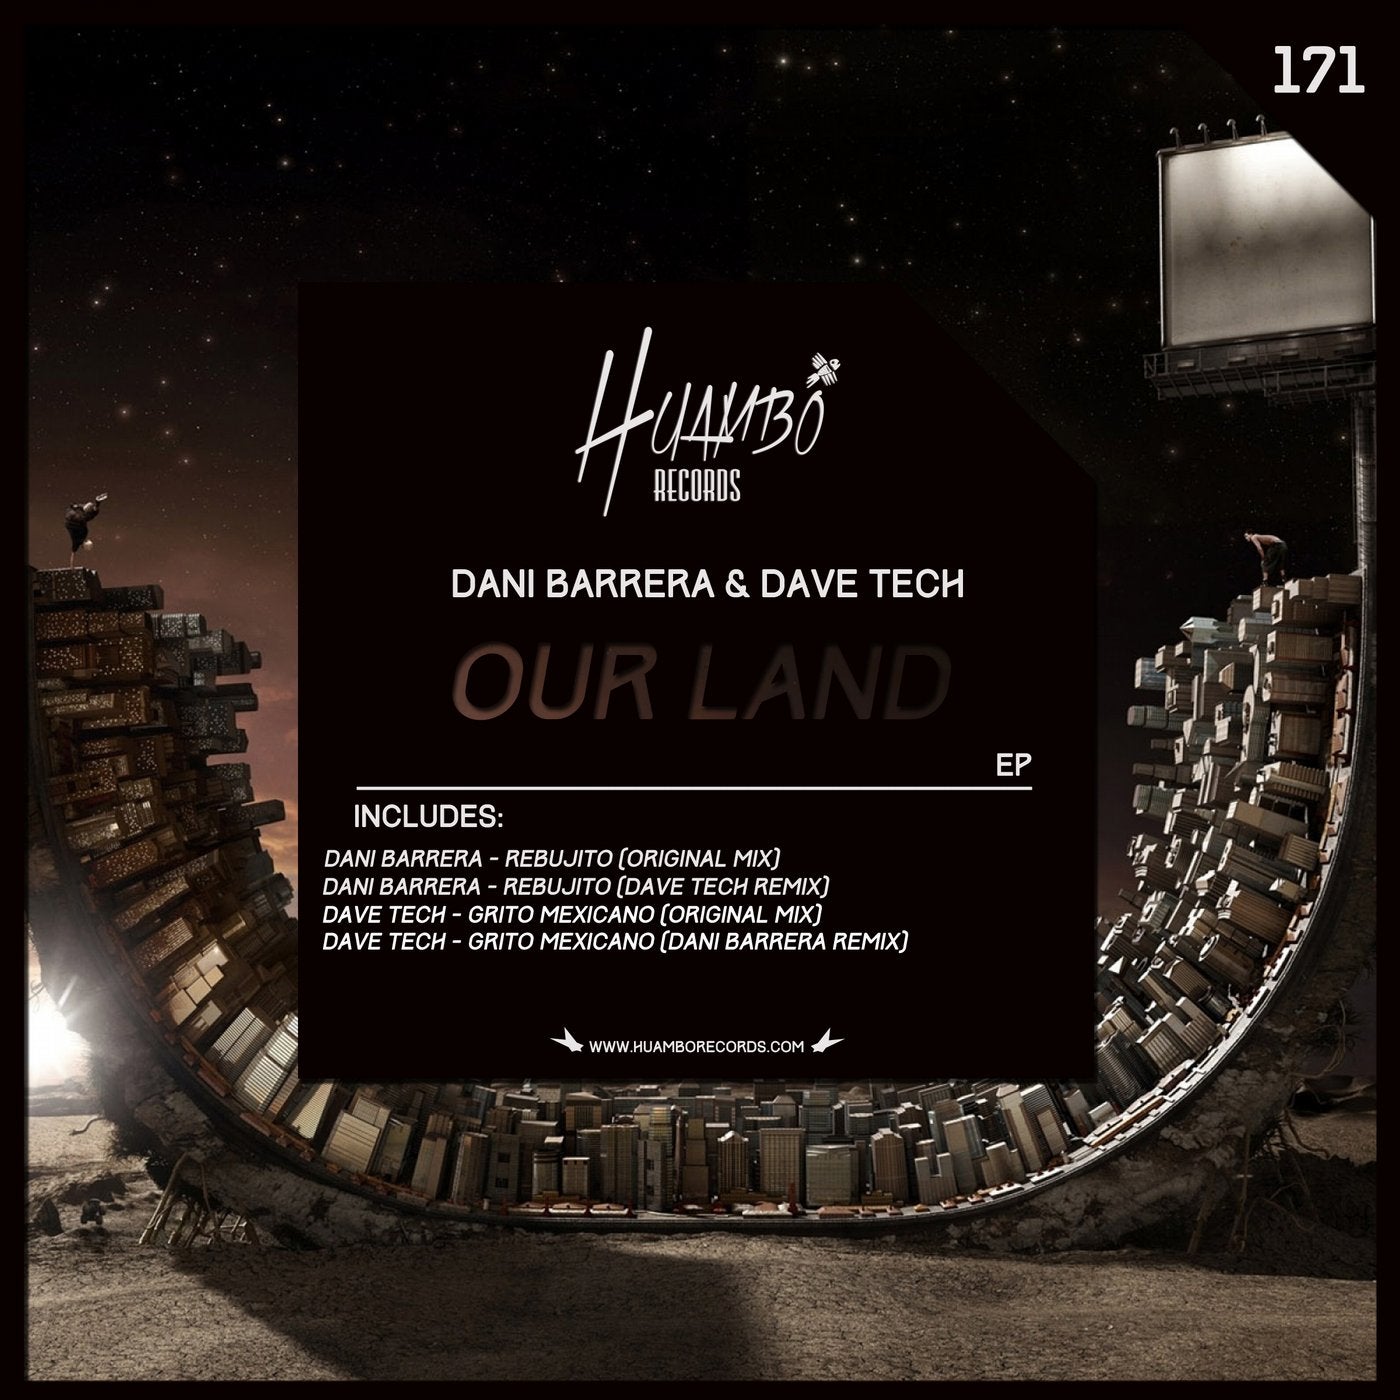 Our Land EP